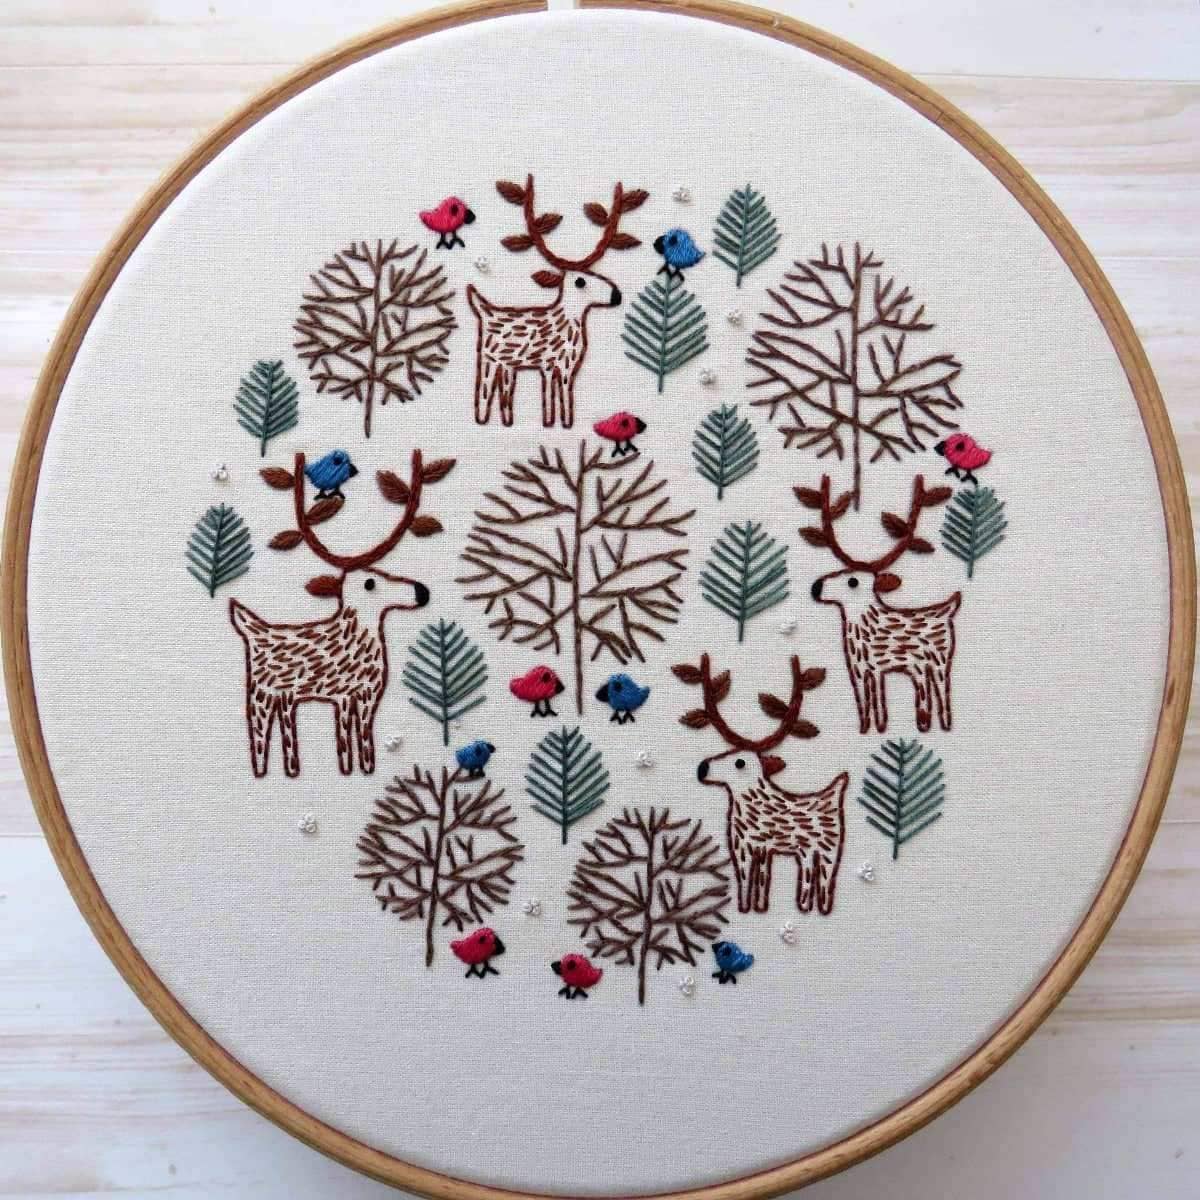 Merry Moose Christmas Hand Embroidery Pattern , PDF Download , StitchDoodles , christmas, embroidery hoop kit, embroidery kit for adults, embroidery kit for beginers, embroidery kits for beginners, embroidery pattern, hand embroidery, PDF pattern , StitchDoodles , shop.stitchdoodles.com